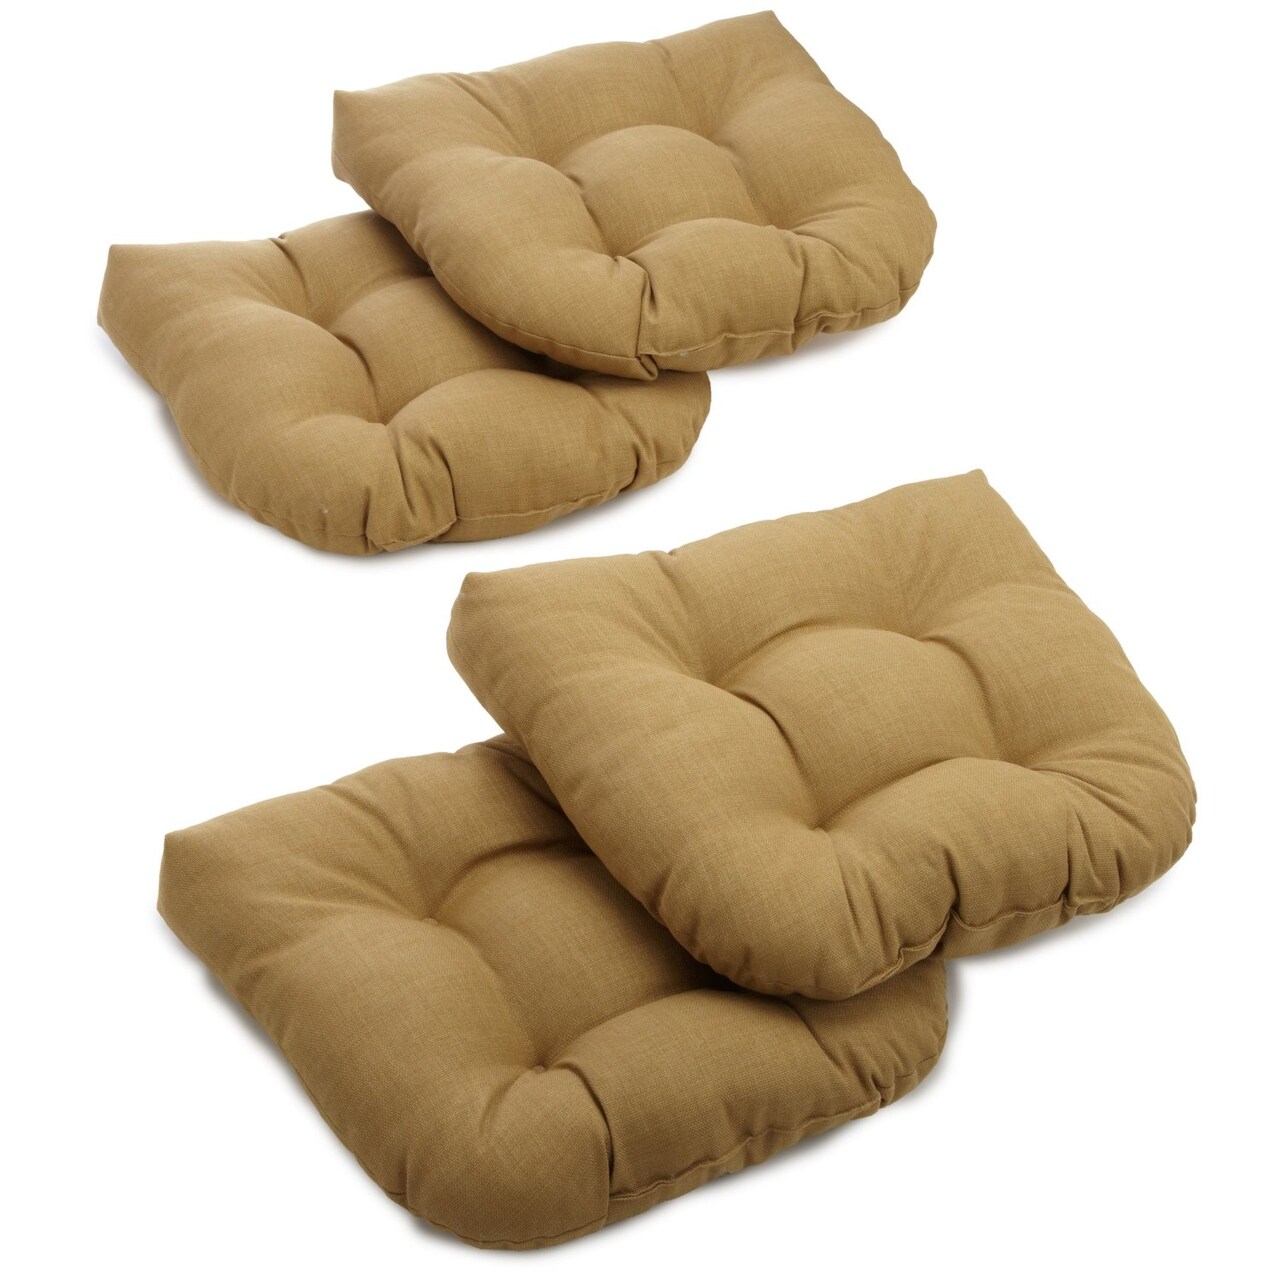 19-inch U-Shaped Spun Polyester Outdoor Tufted Dining Chair Cushions (Set  of 4) - Wheat